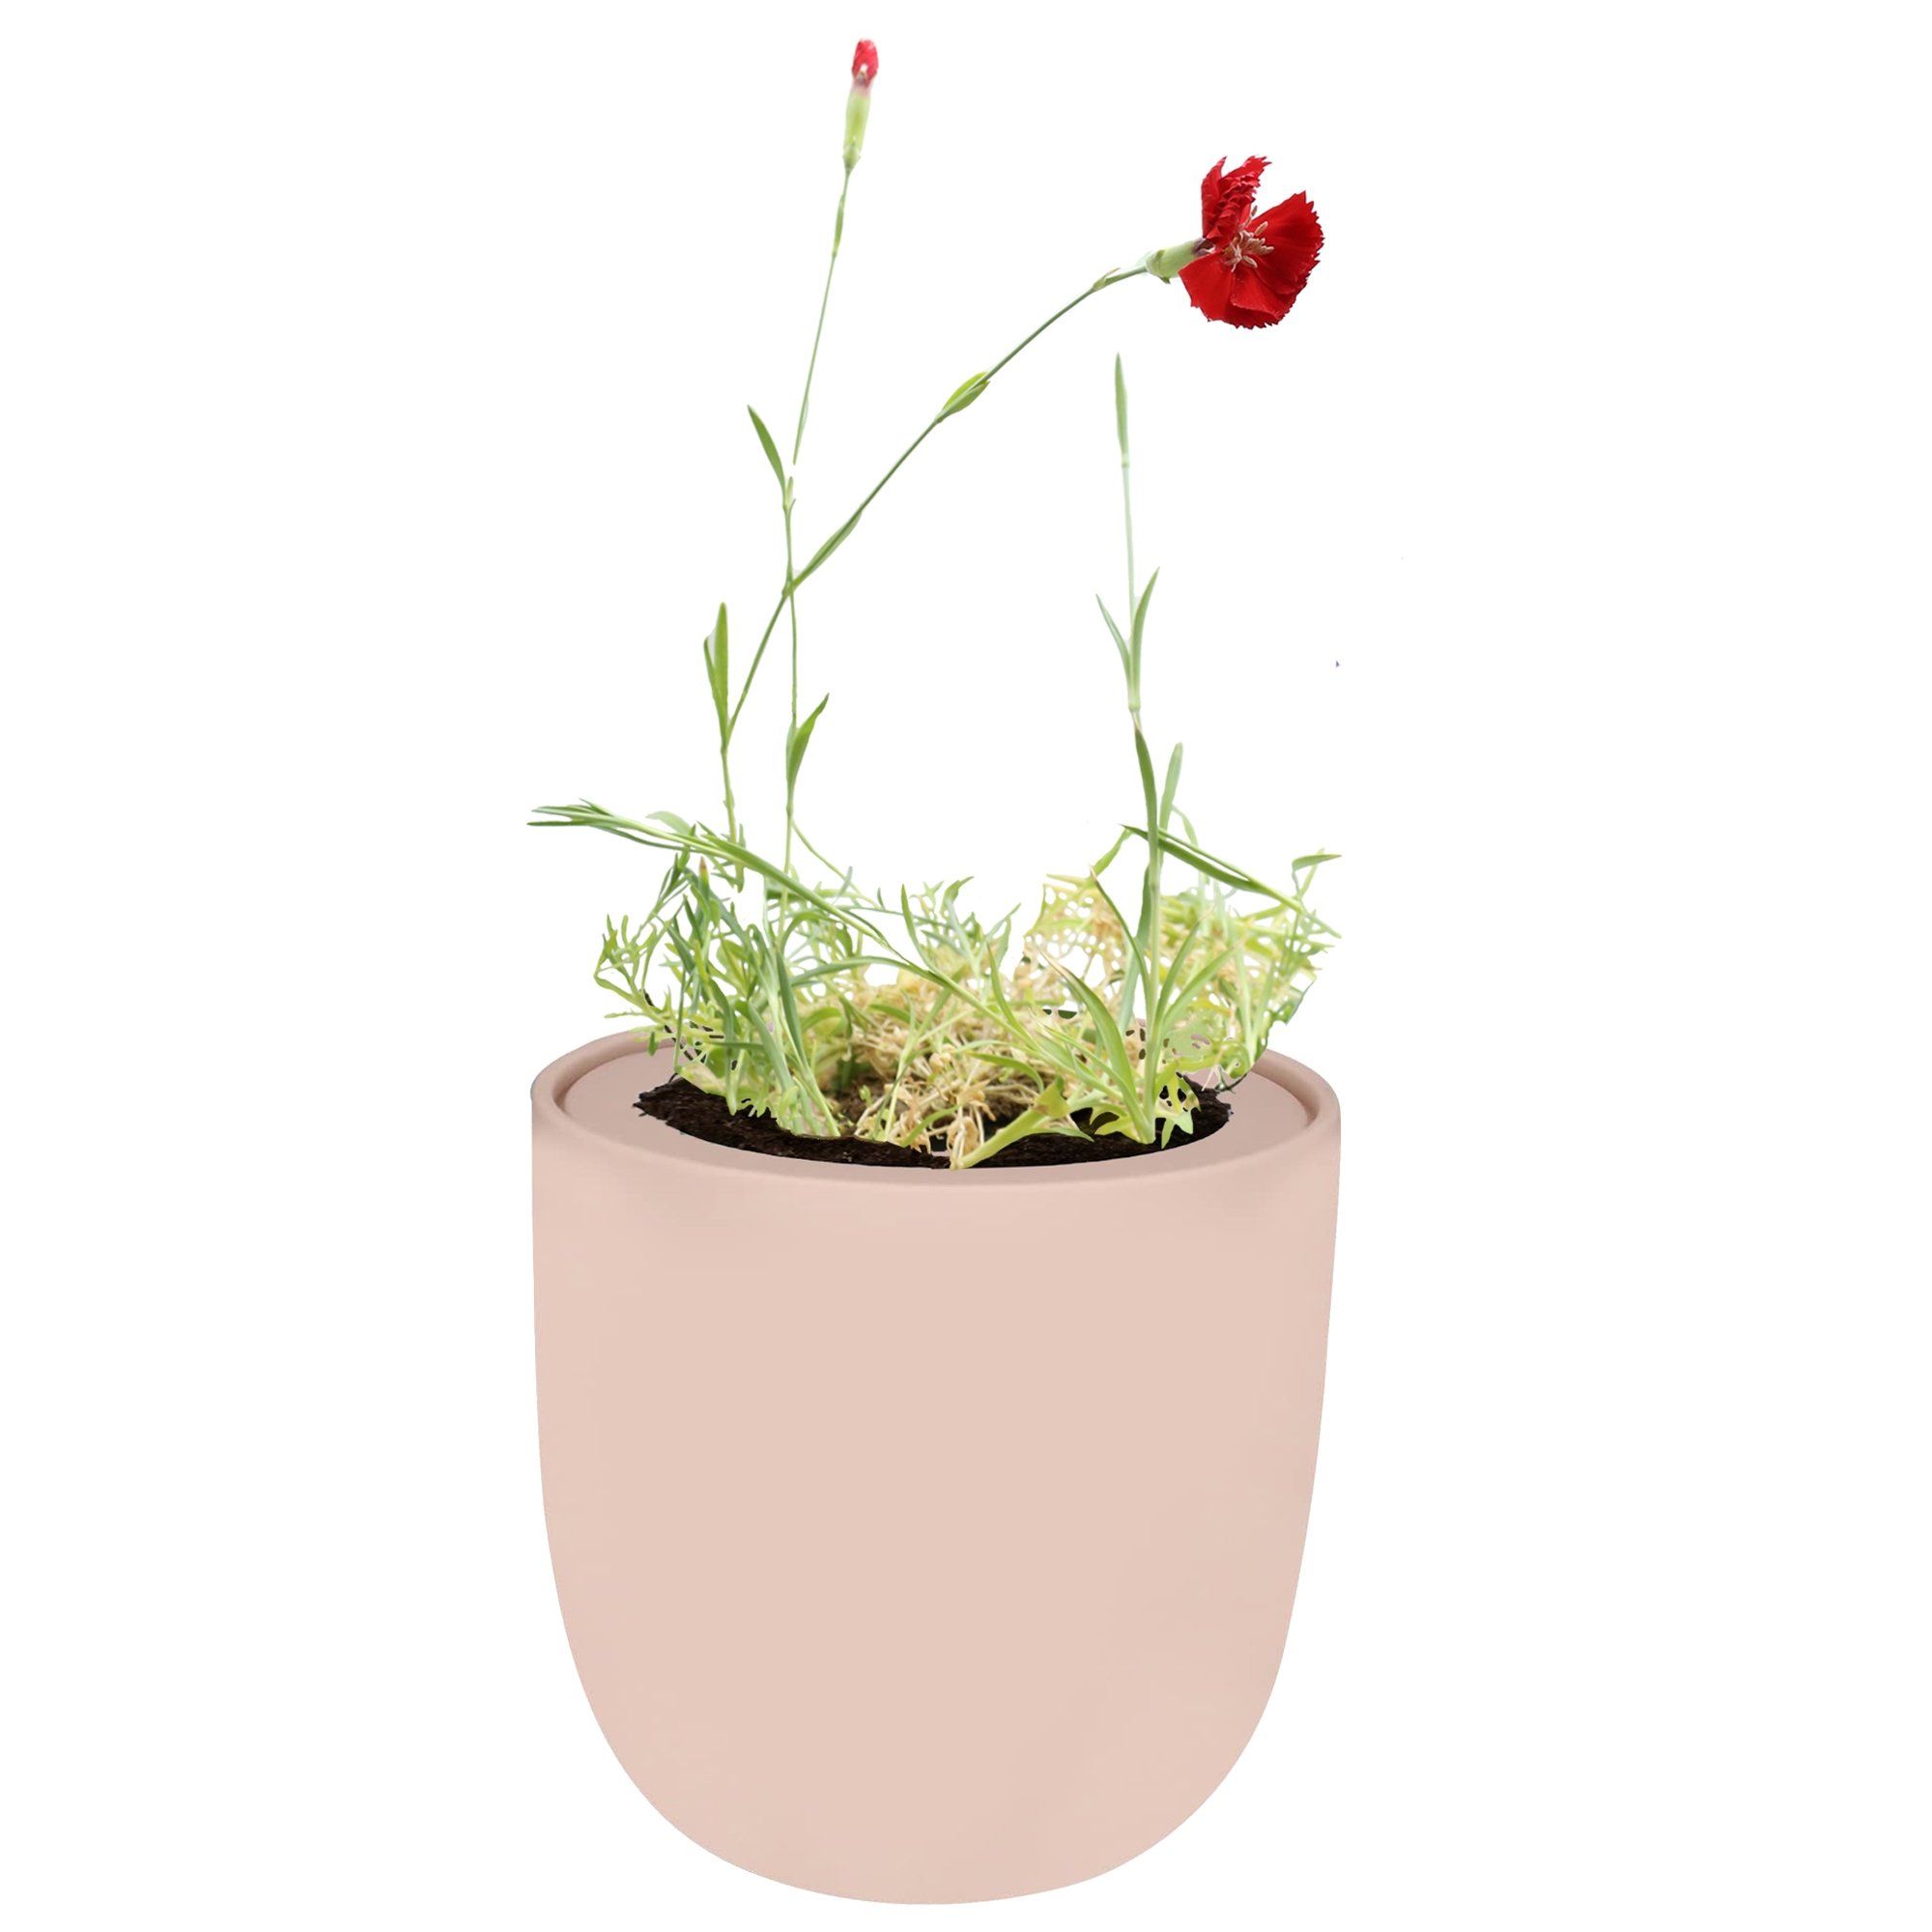 Hydroponic Growing Kit with Pink Ceramic Pot and Seeds (P-Carnation (Chabaud Giant Red))